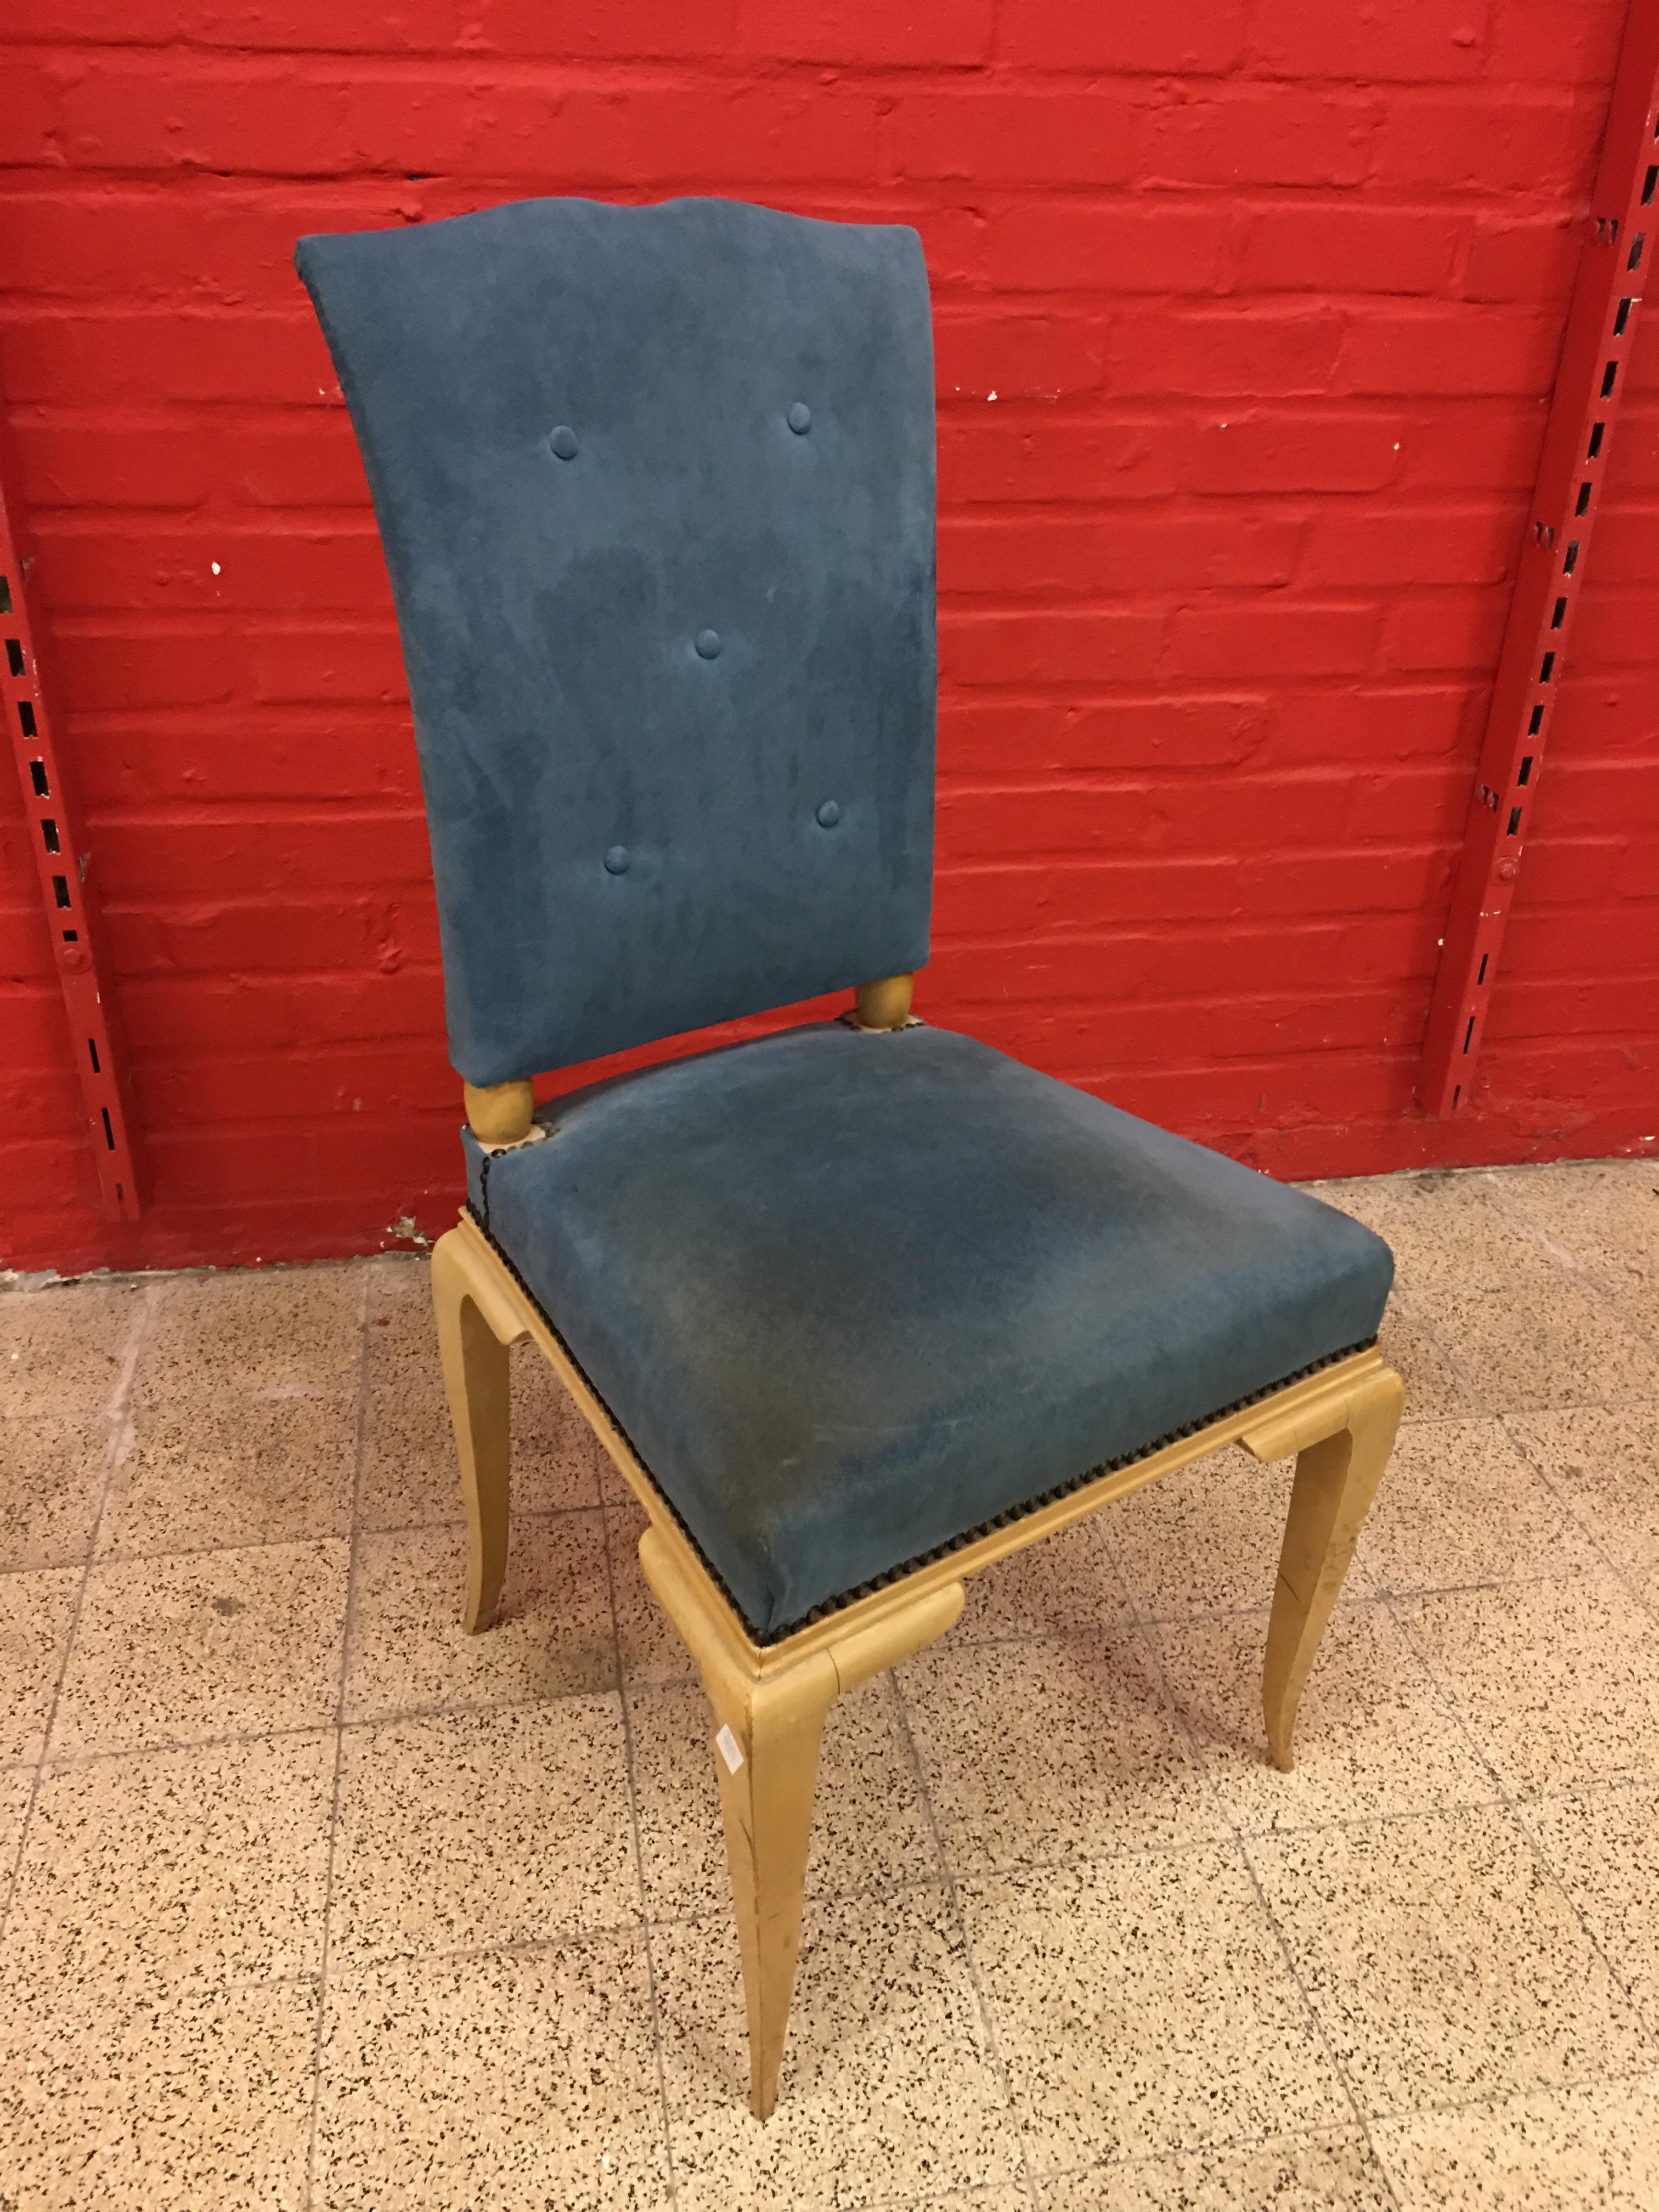 René Prou, Art Deco Chair in Lacquered Wood and Blue Velvet, circa 1940-1950 For Sale 2